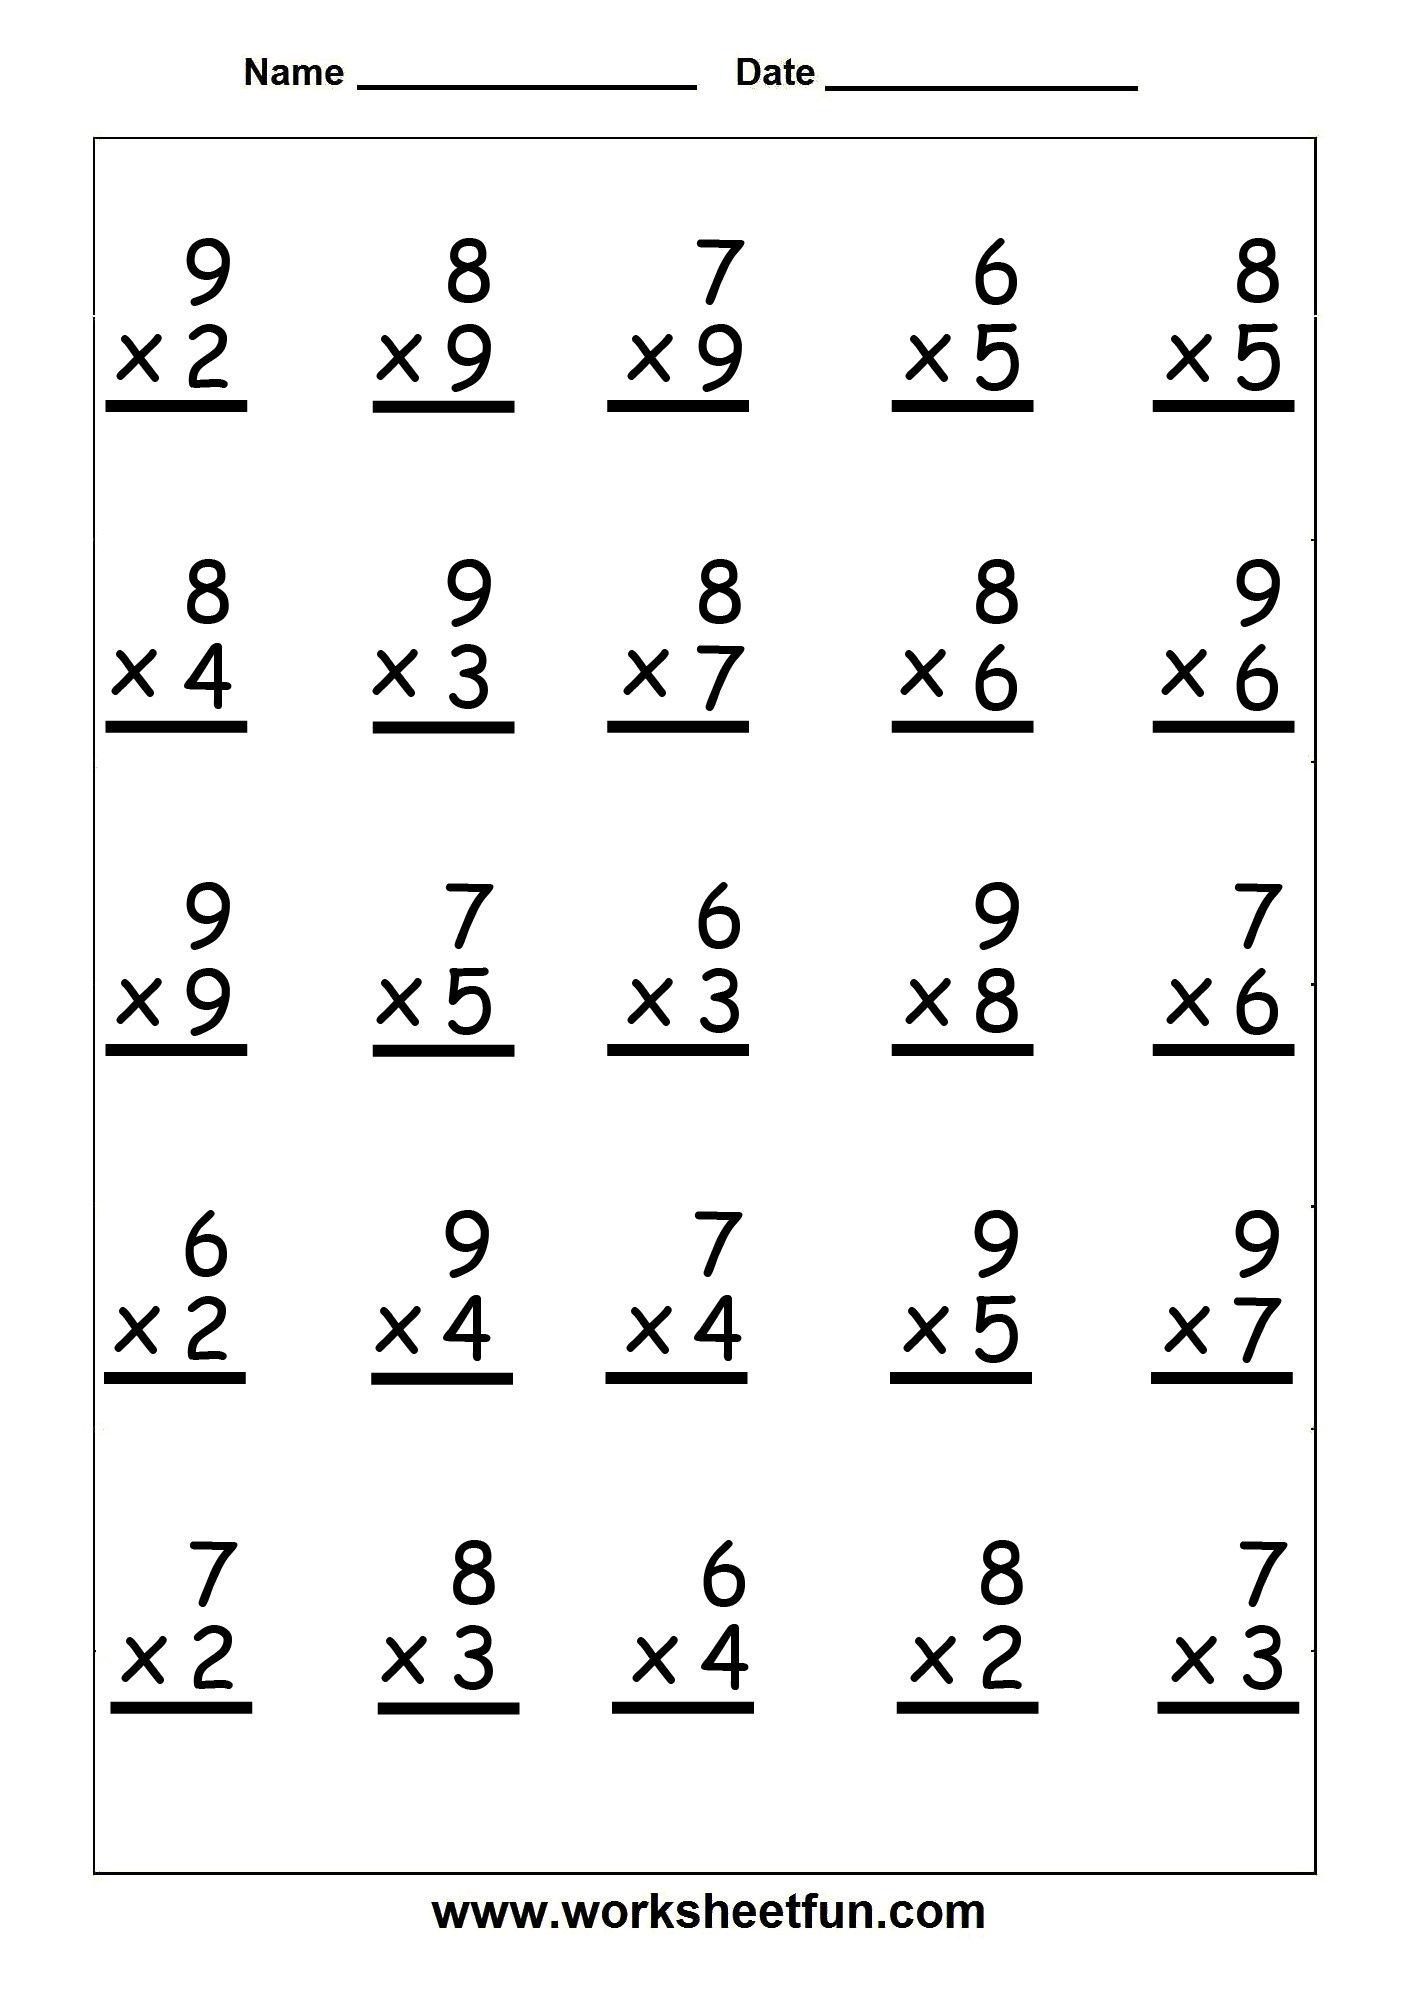 Multiplication Worksheets And Printouts Free Printable Multiplication Worksheets Free Printable